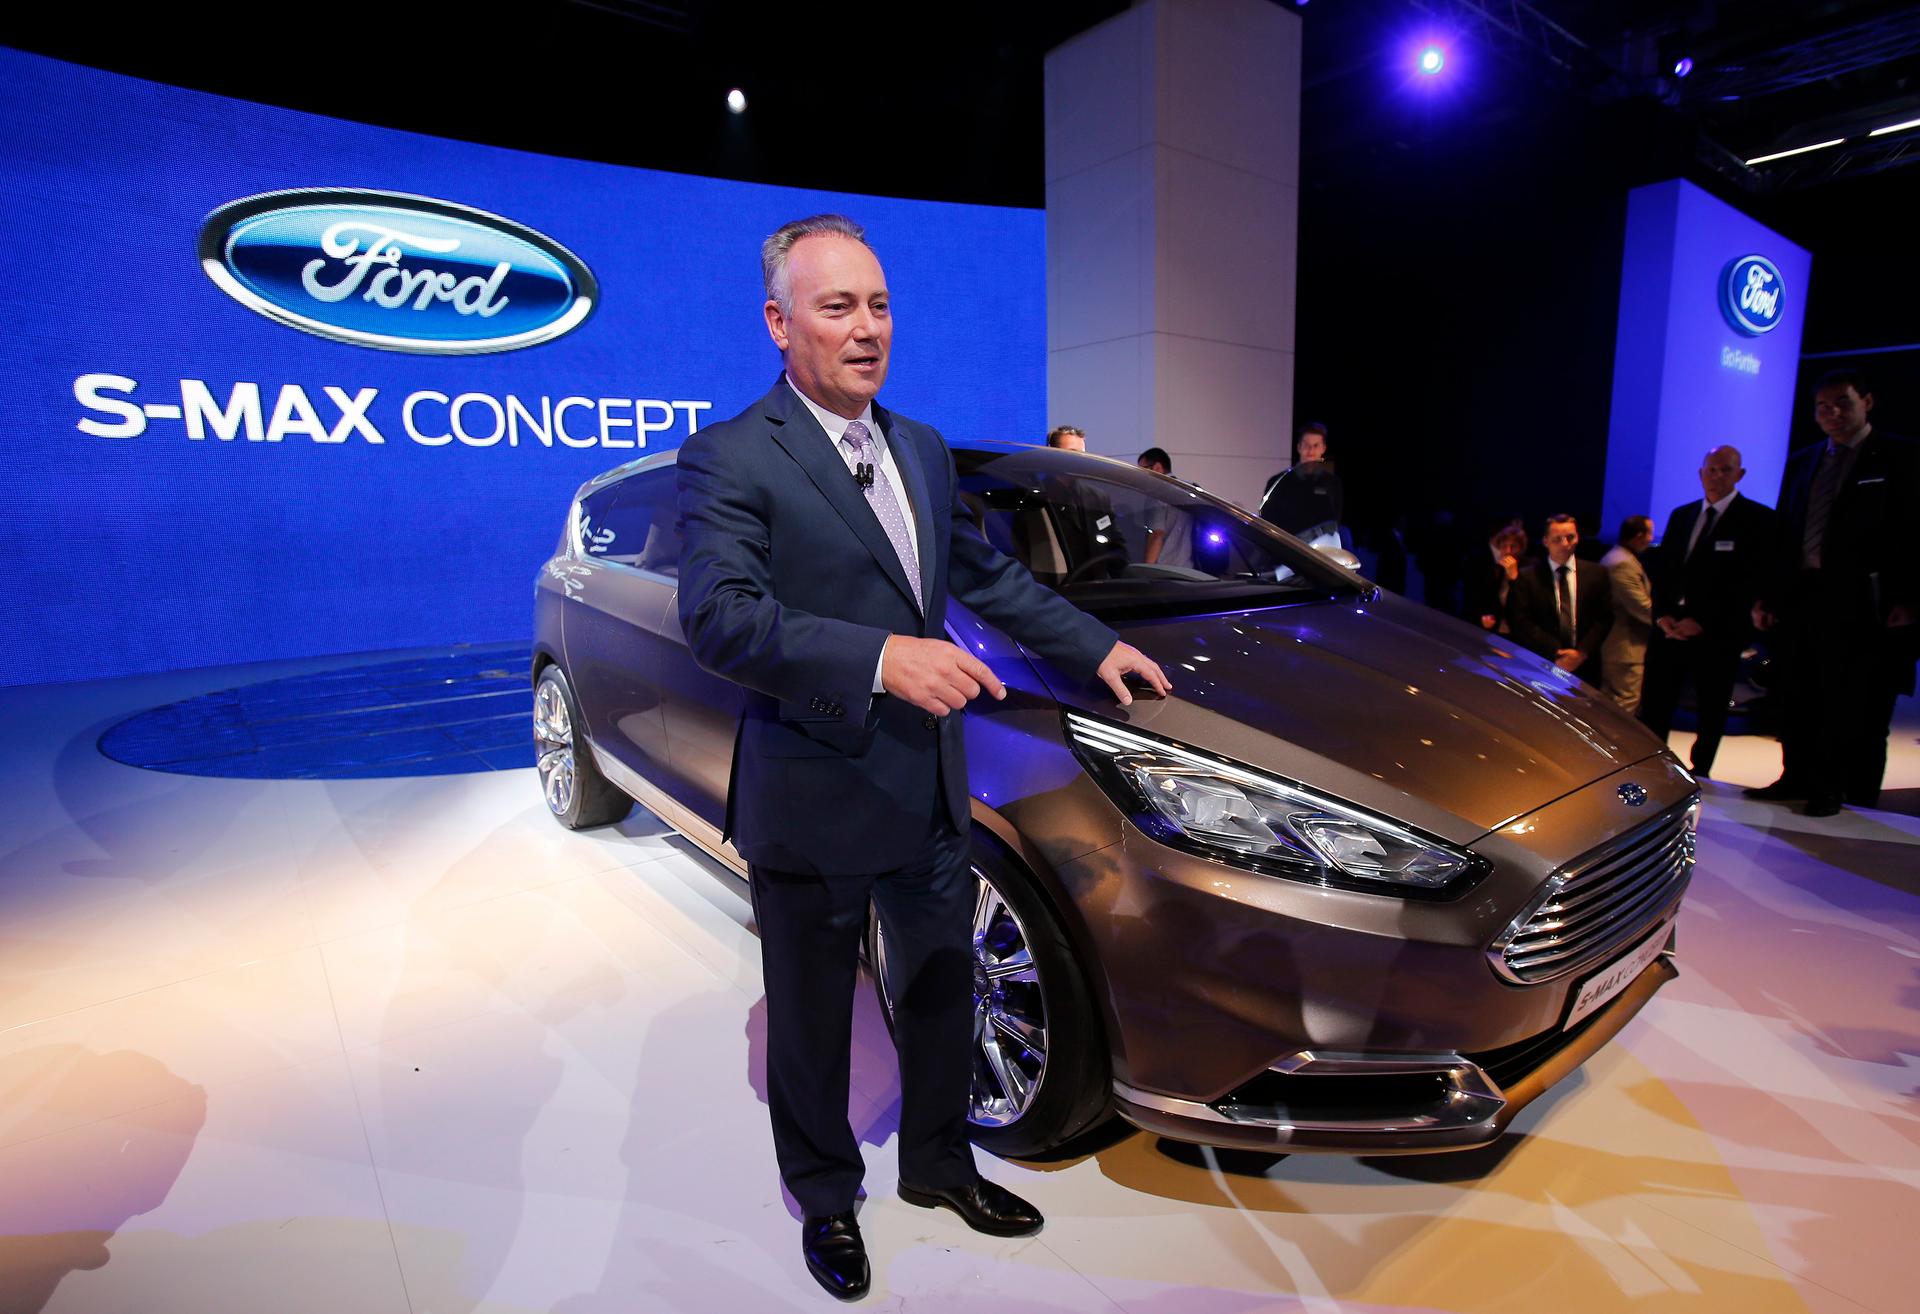 Ford of Europe CEO Steve Odell poses next to a Ford S-Max concept car during a media preview day at the 2013 Frankfurt Motor Show.